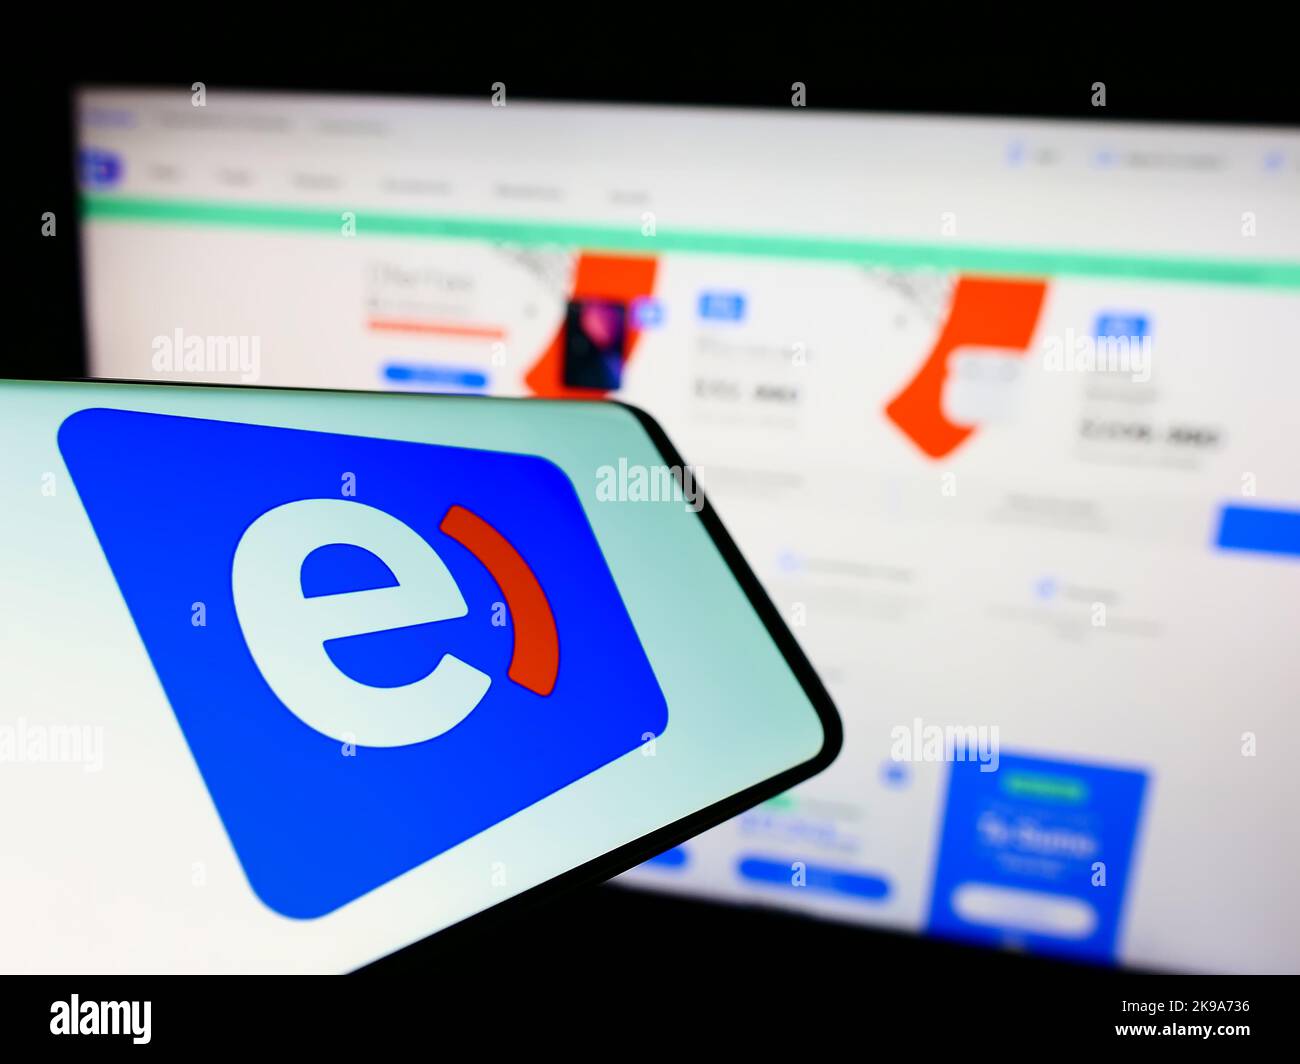 Mobile phone with logo of telecommunications company Entel Chile on screen in front of business website. Focus on center of phone display. Stock Photo